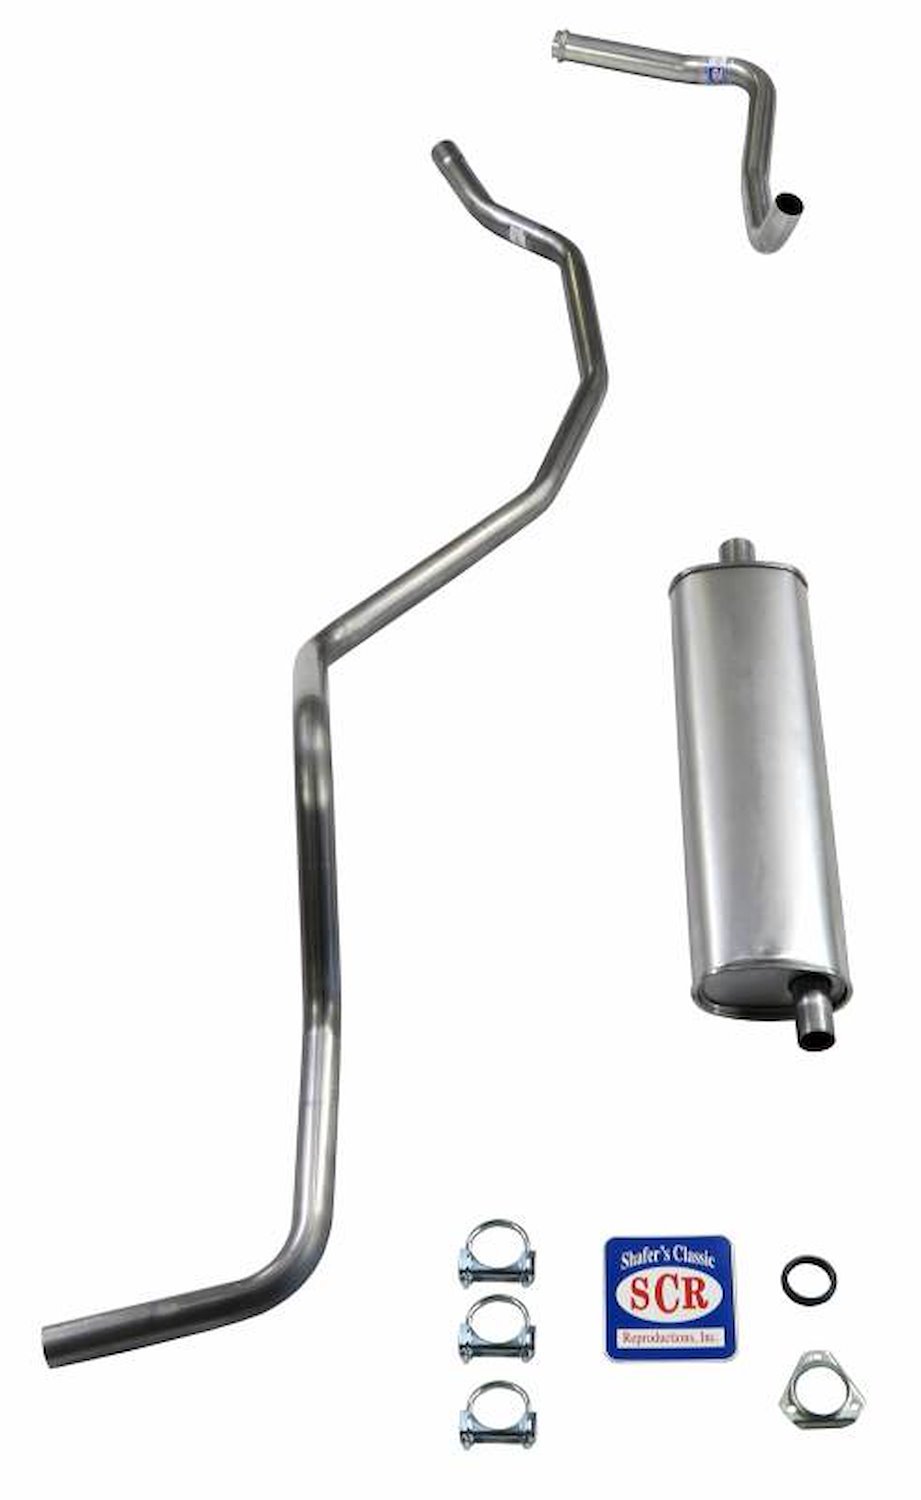 73038S 1960-1962 SW 6-cyl Single Exhaust & 1960 El Camino Exhaust System, 304 Stainless Steel